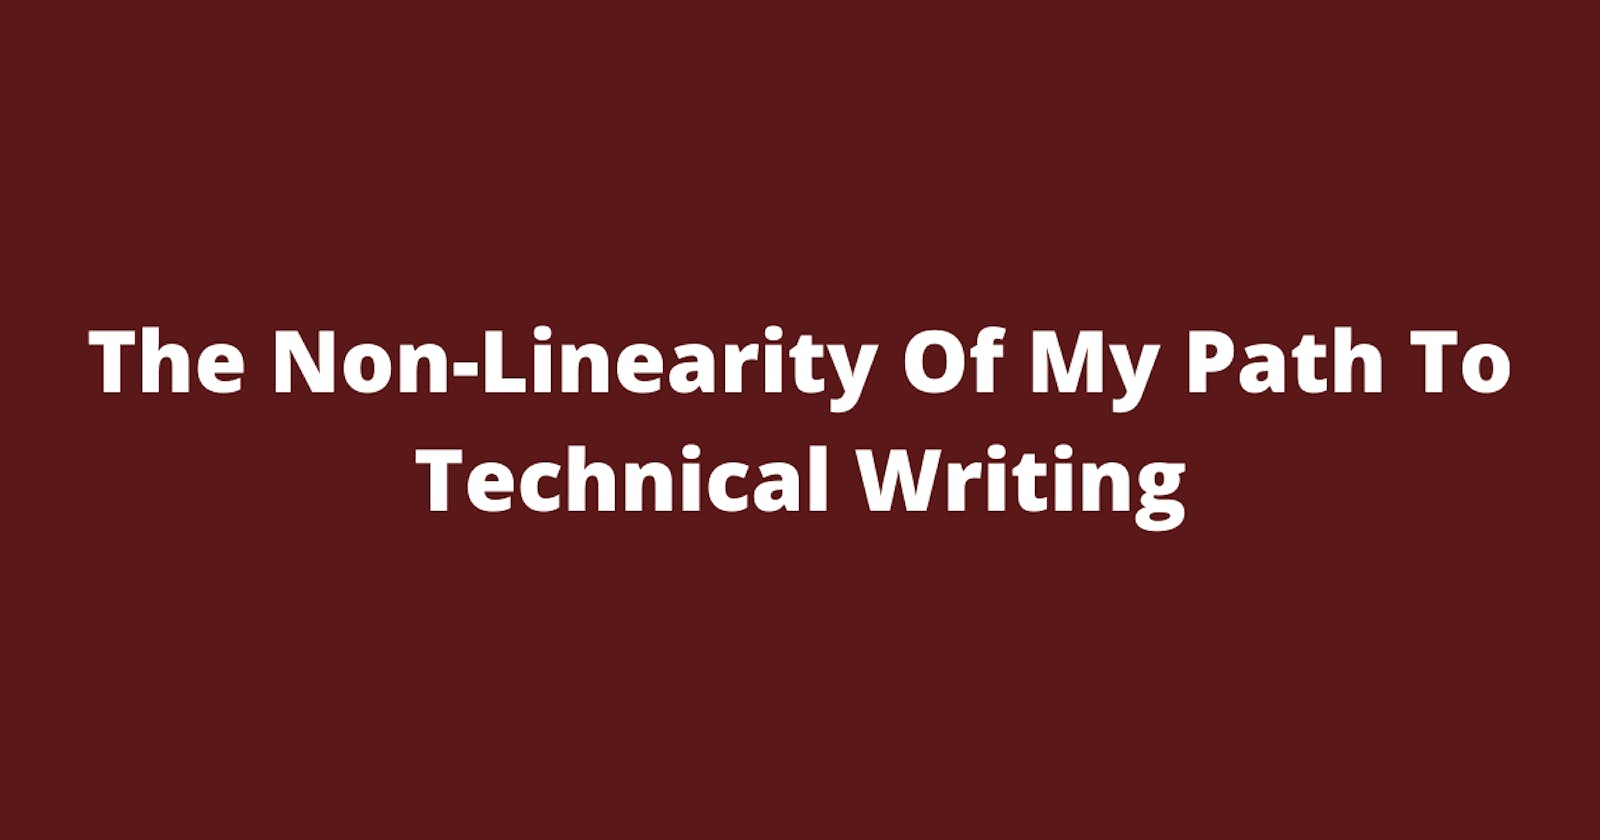 The Non-Linearity Of My Path To Technical Writing